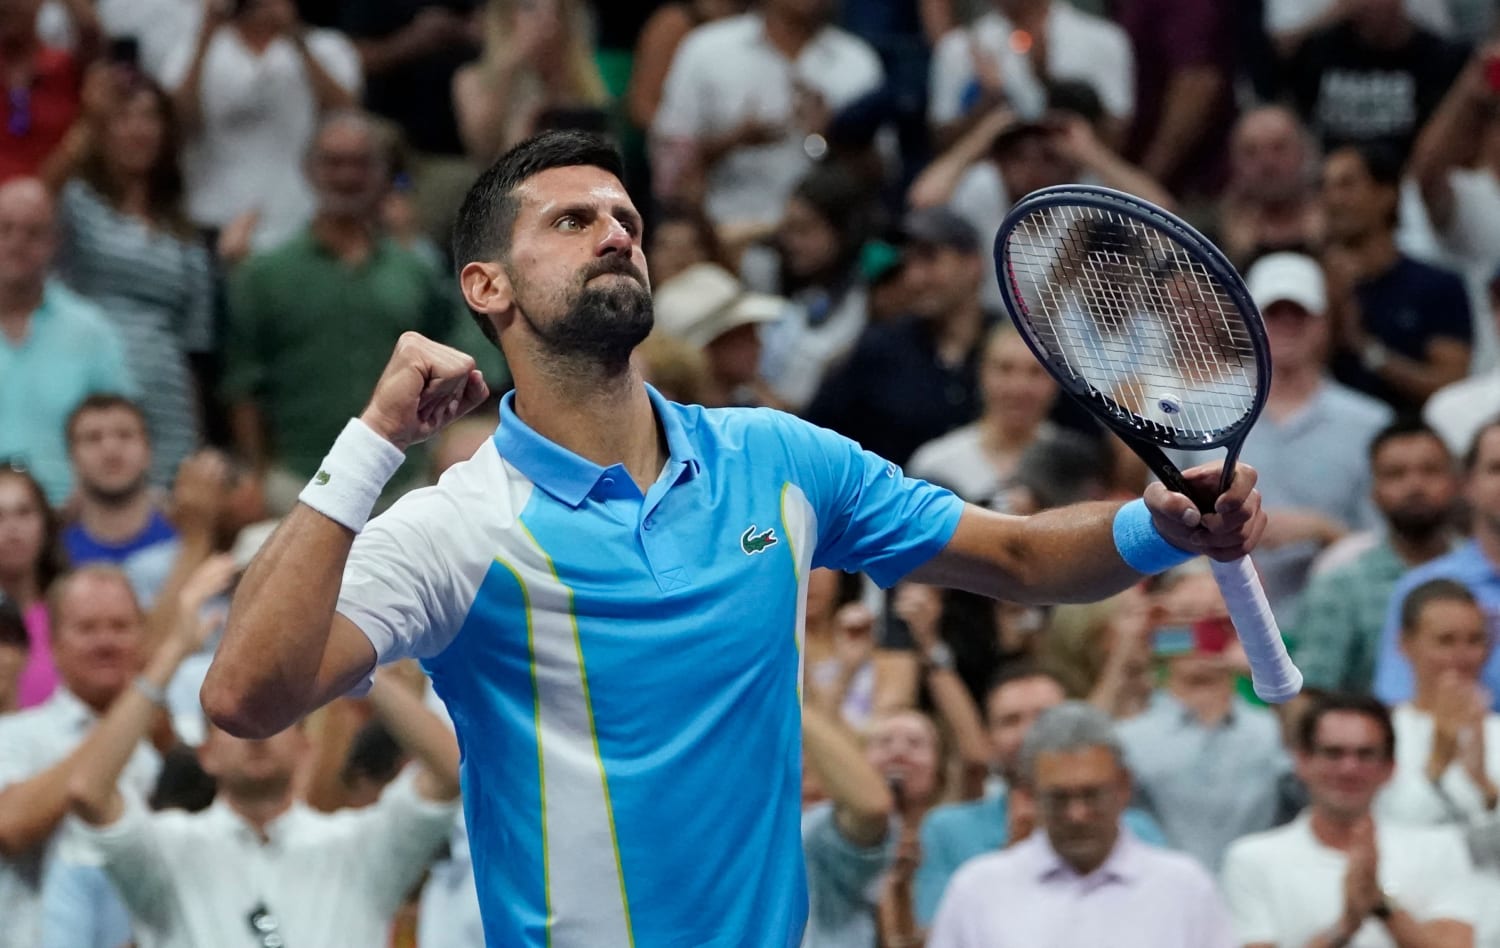 At age 36, Novak Djokovic wants his career of greatness to last a little longer